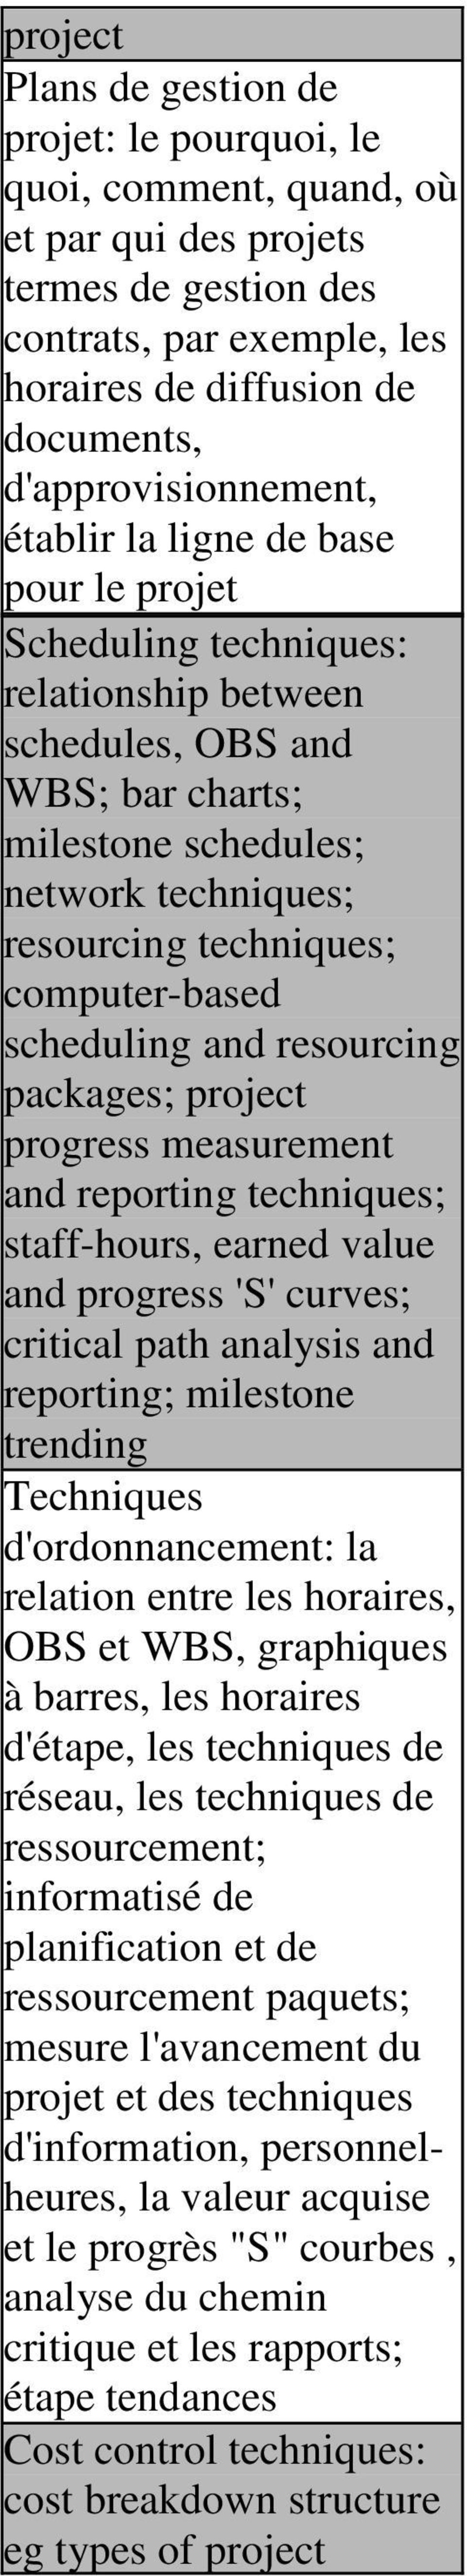 techniques; computer-based scheduling and resourcing packages; project progress measurement and reporting techniques; staff-hours, earned value and progress 'S' curves; critical path analysis and